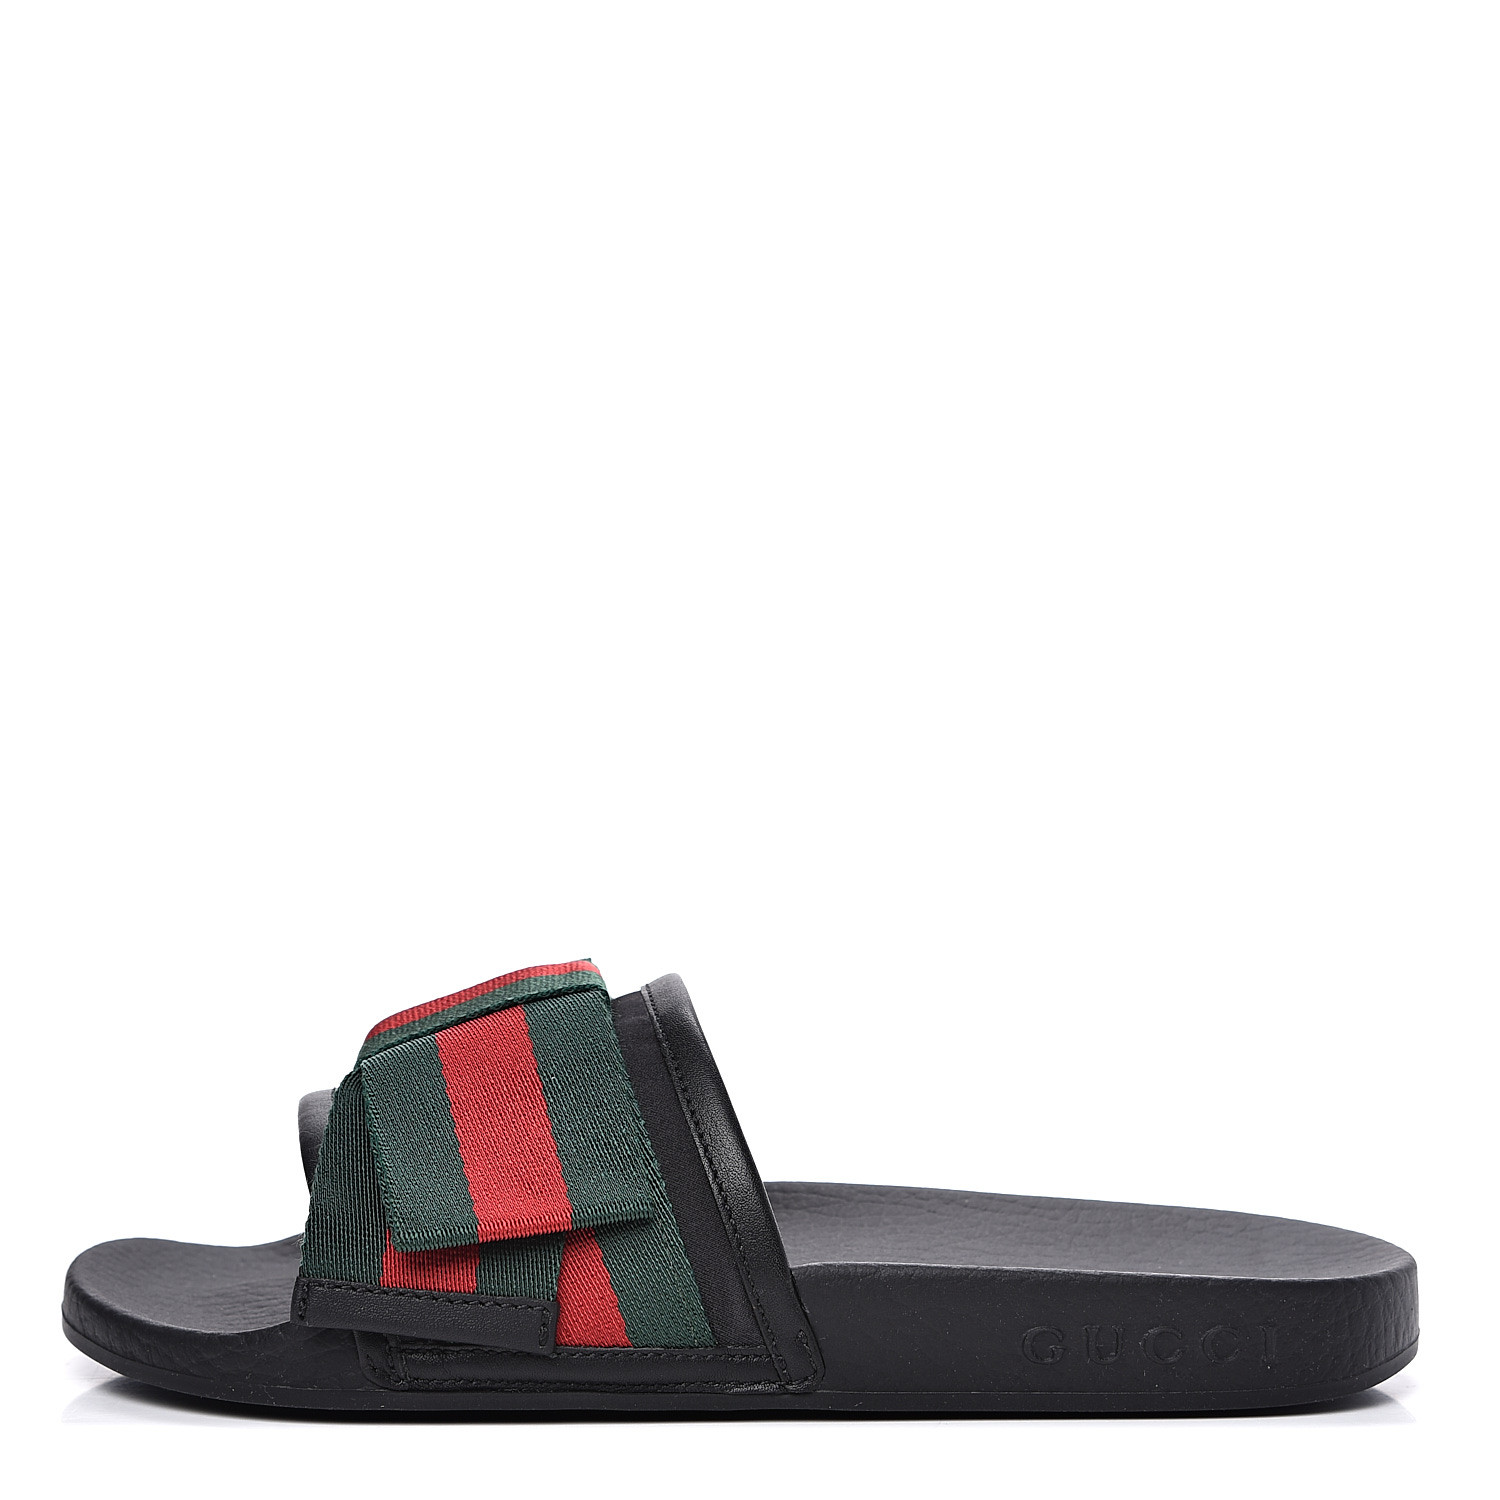 Gucci Slides Satin Bow Online TO 62% OFF